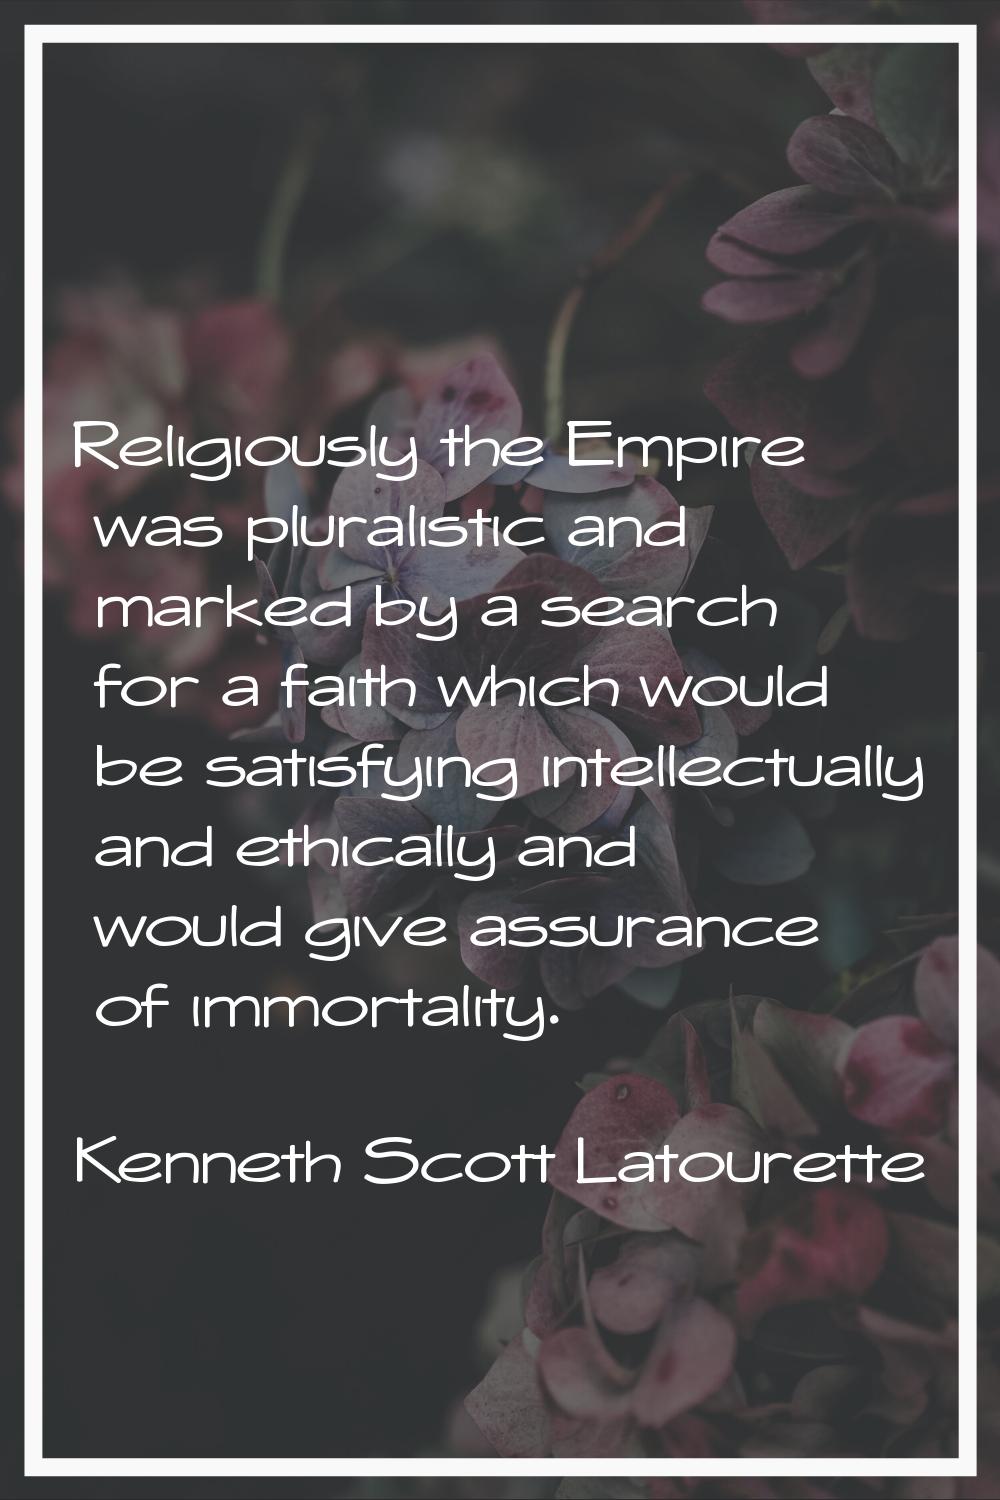 Religiously the Empire was pluralistic and marked by a search for a faith which would be satisfying